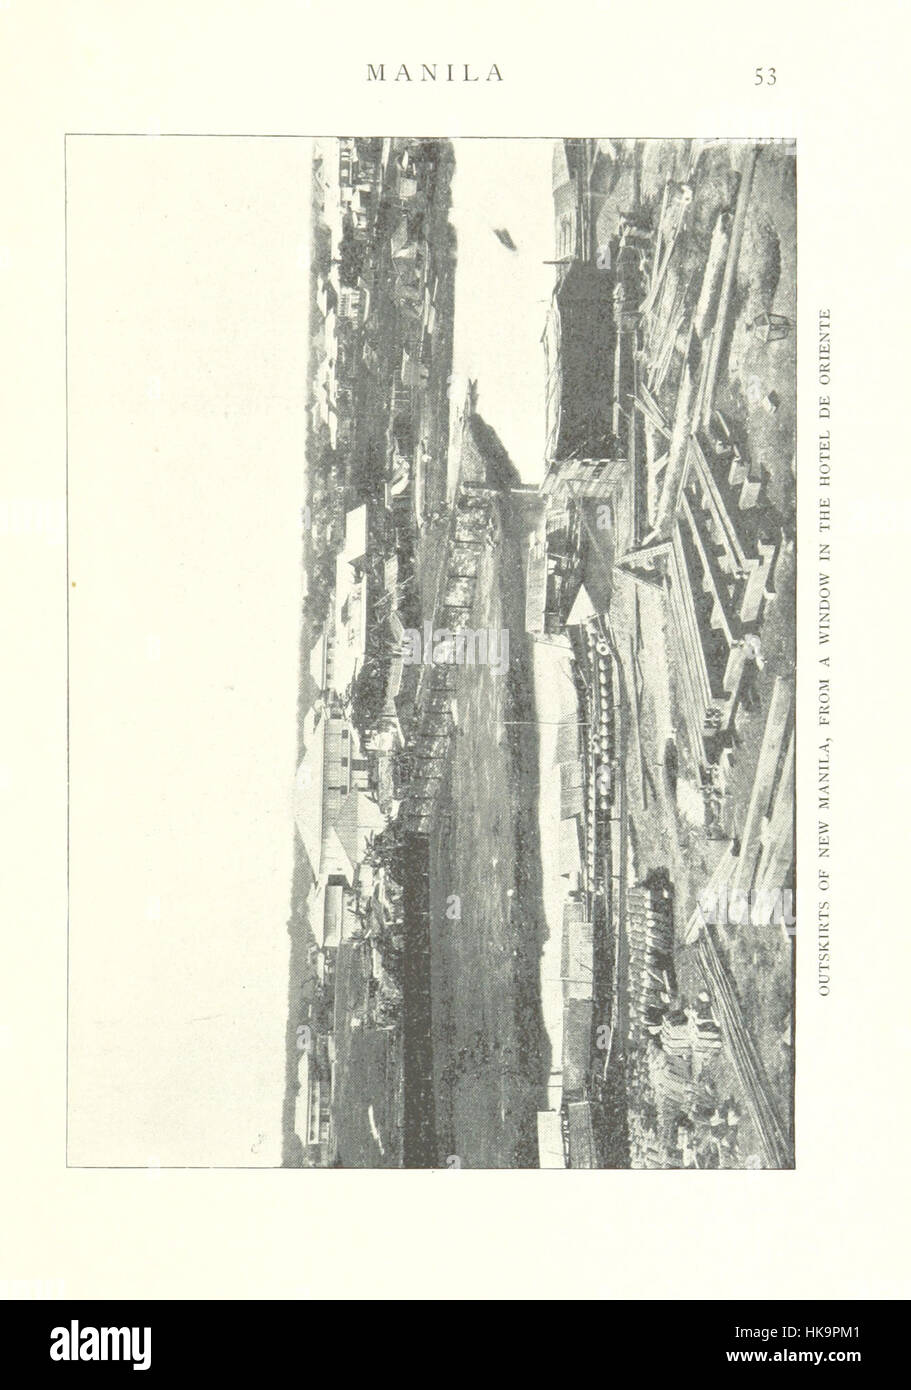 The Philippine Islands and their people: a record of personal observation and experience, with a short summary of the more important facts in the history of the archipelago. [With illustrations.] Image taken from page 79 of 'The Philippine Stock Photo